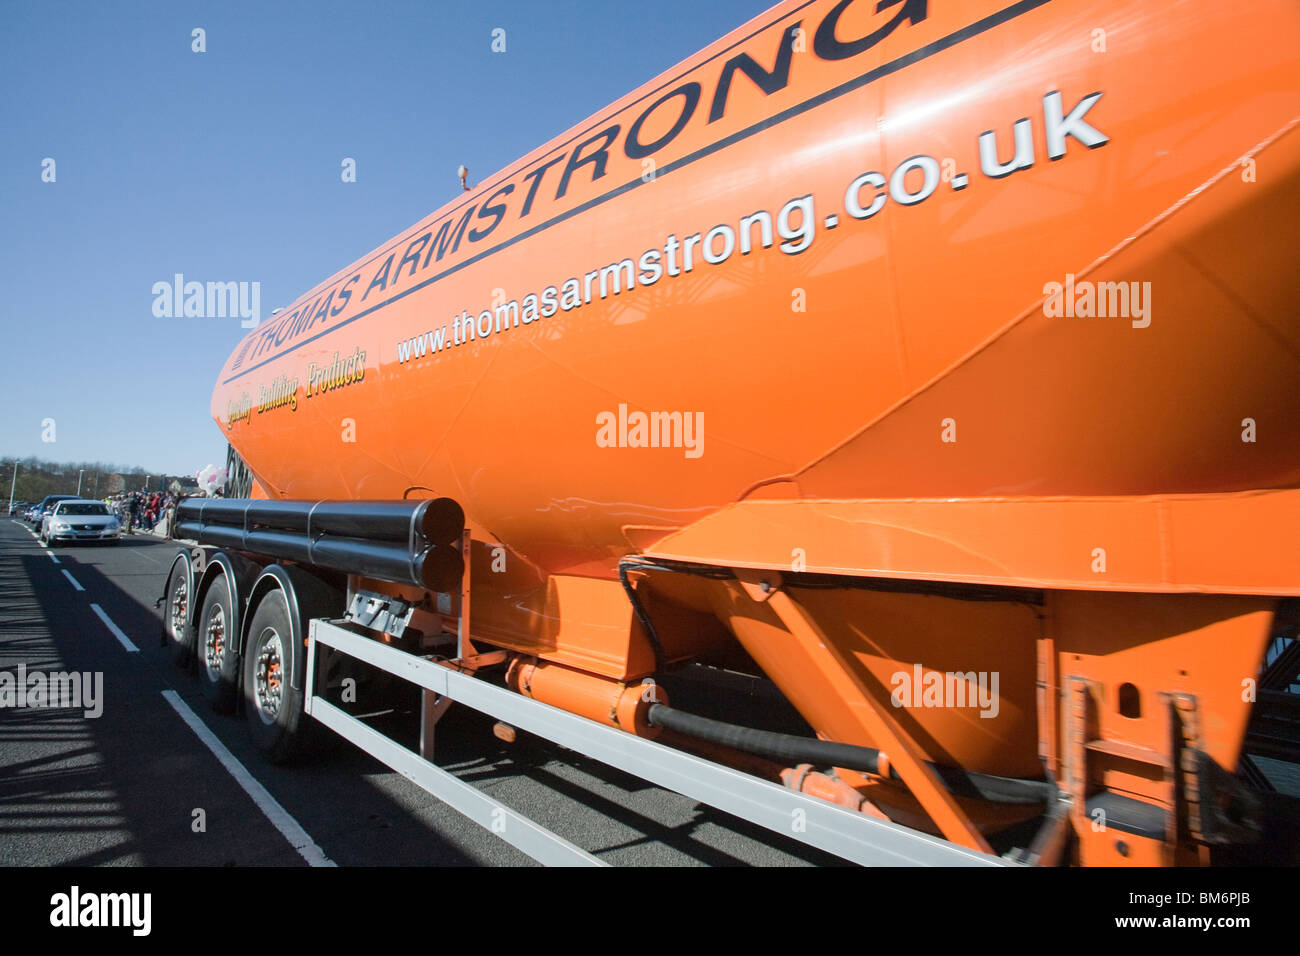 A tanker crossing the newly opened road bridge in Workington, Cumbria, UK. Stock Photo